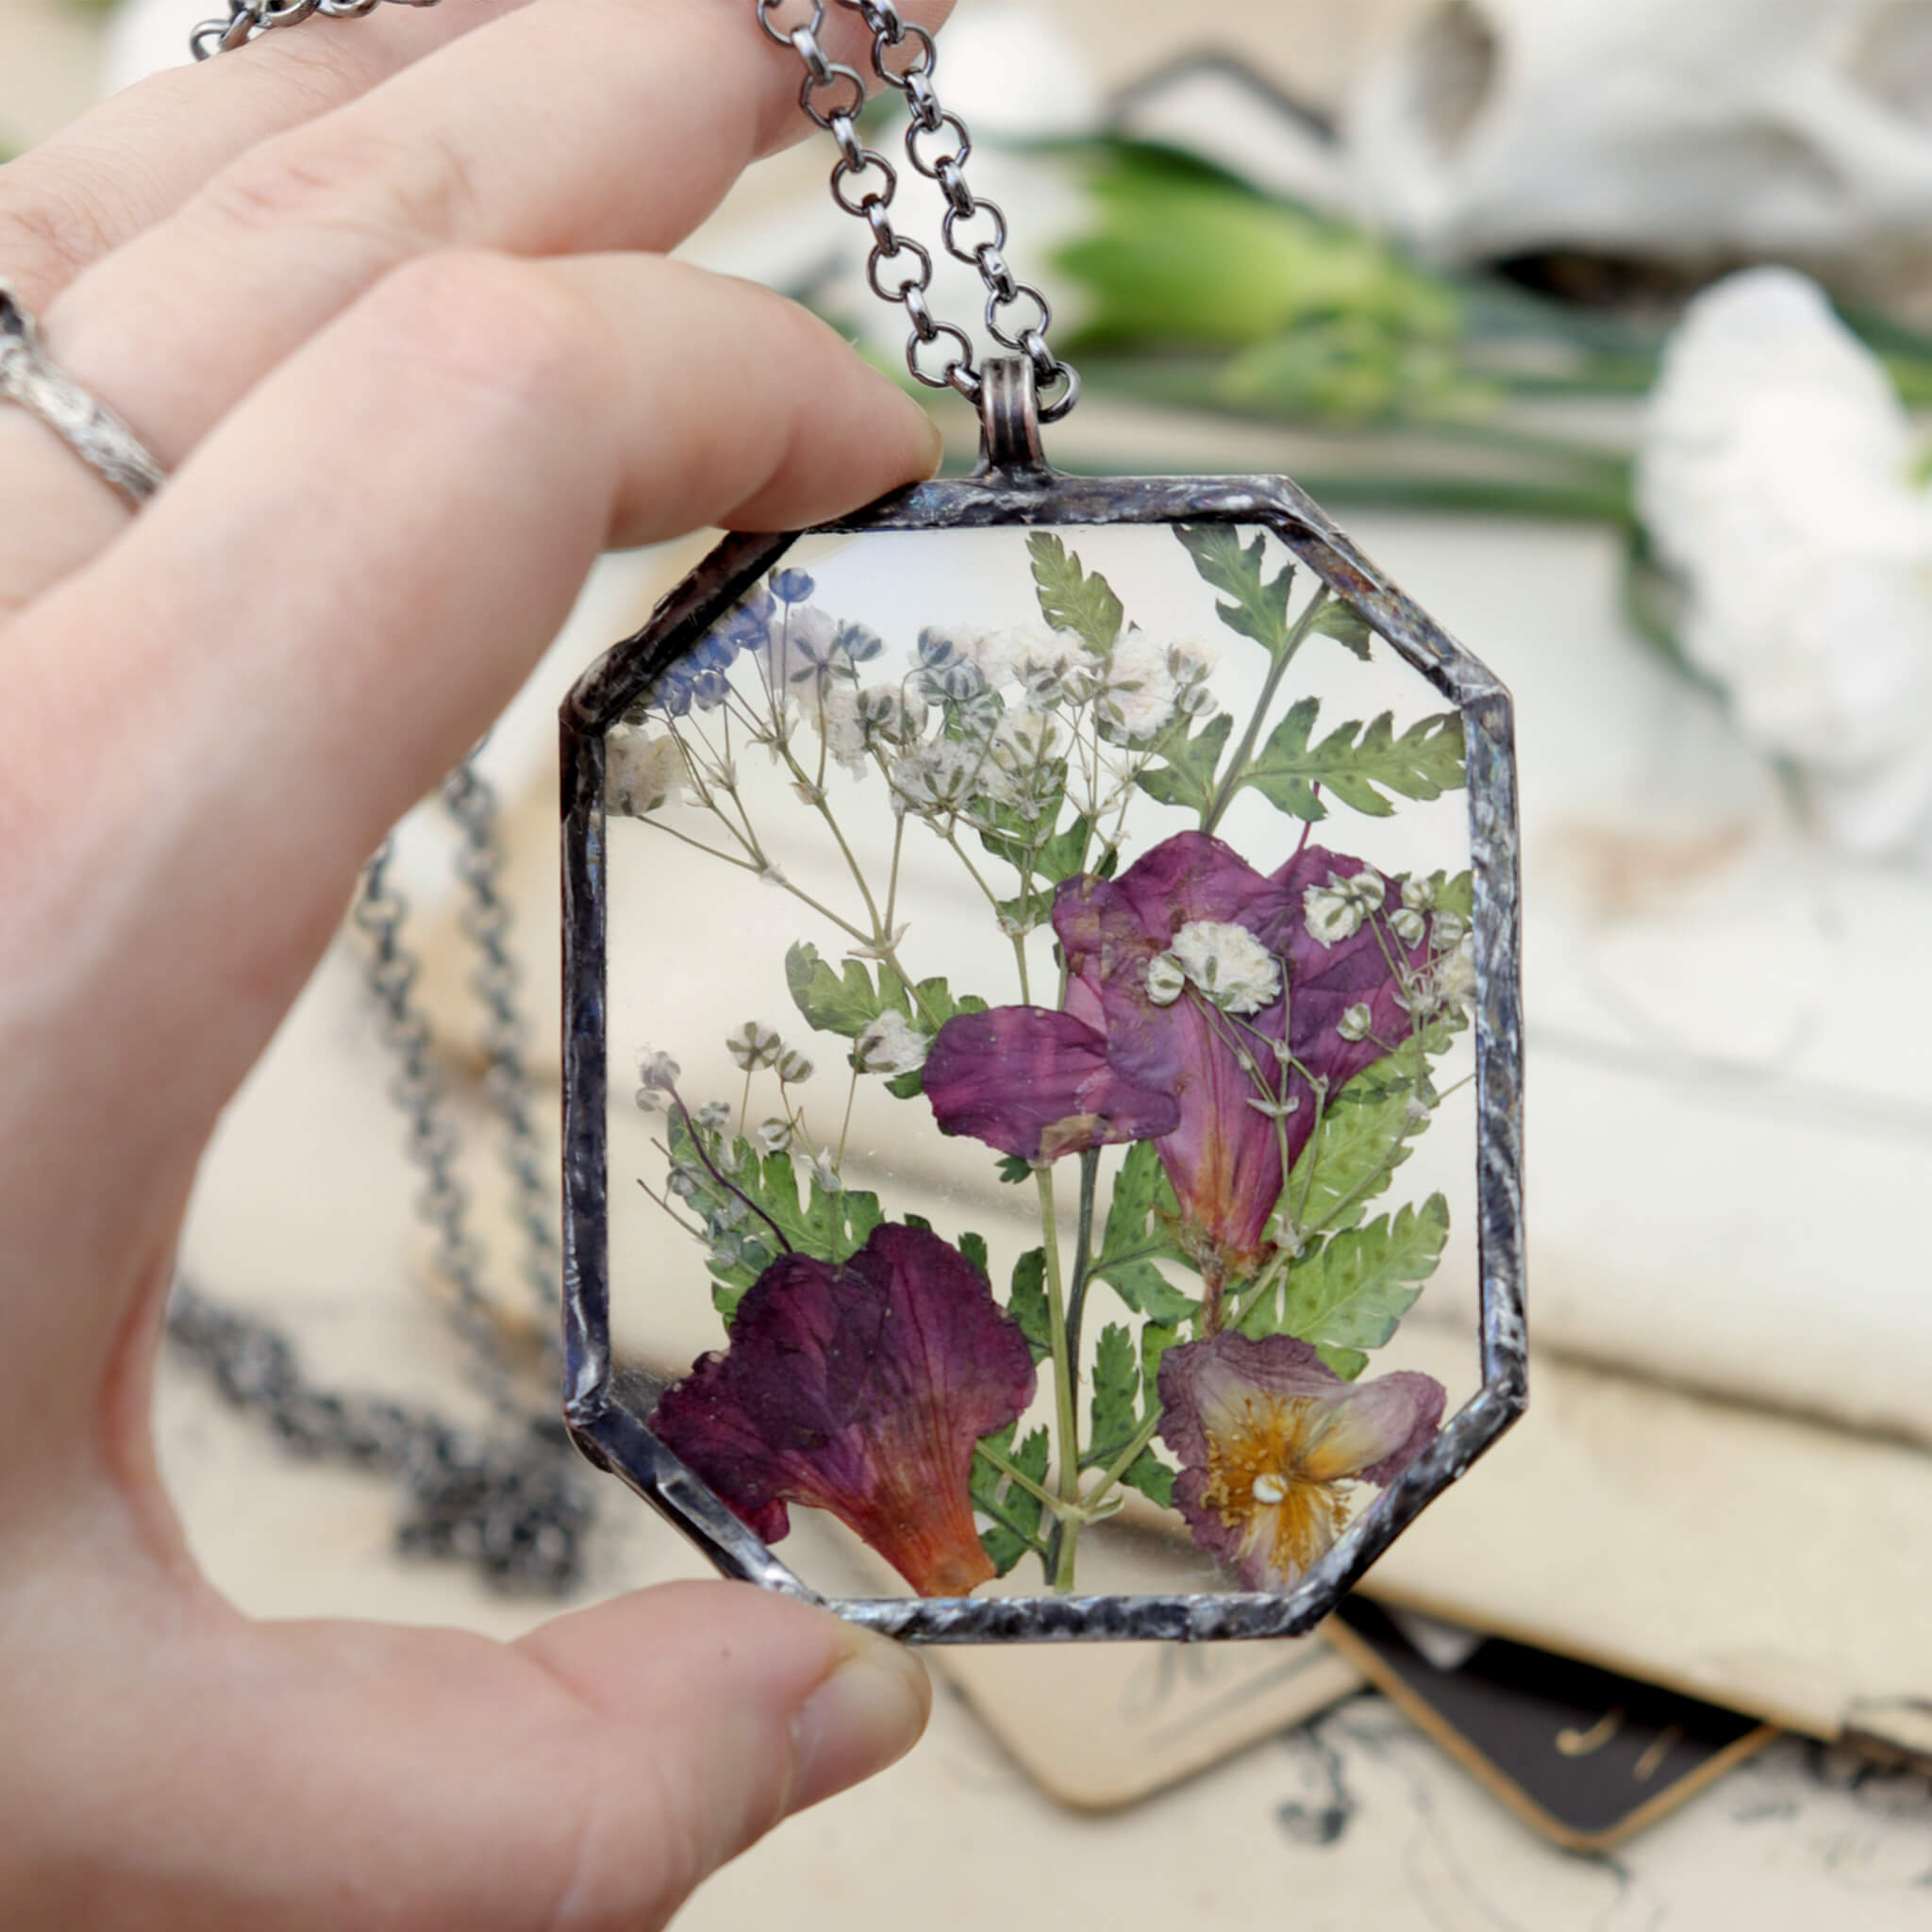 Hand holding pink flowers and green ferns in glass and solder necklace 